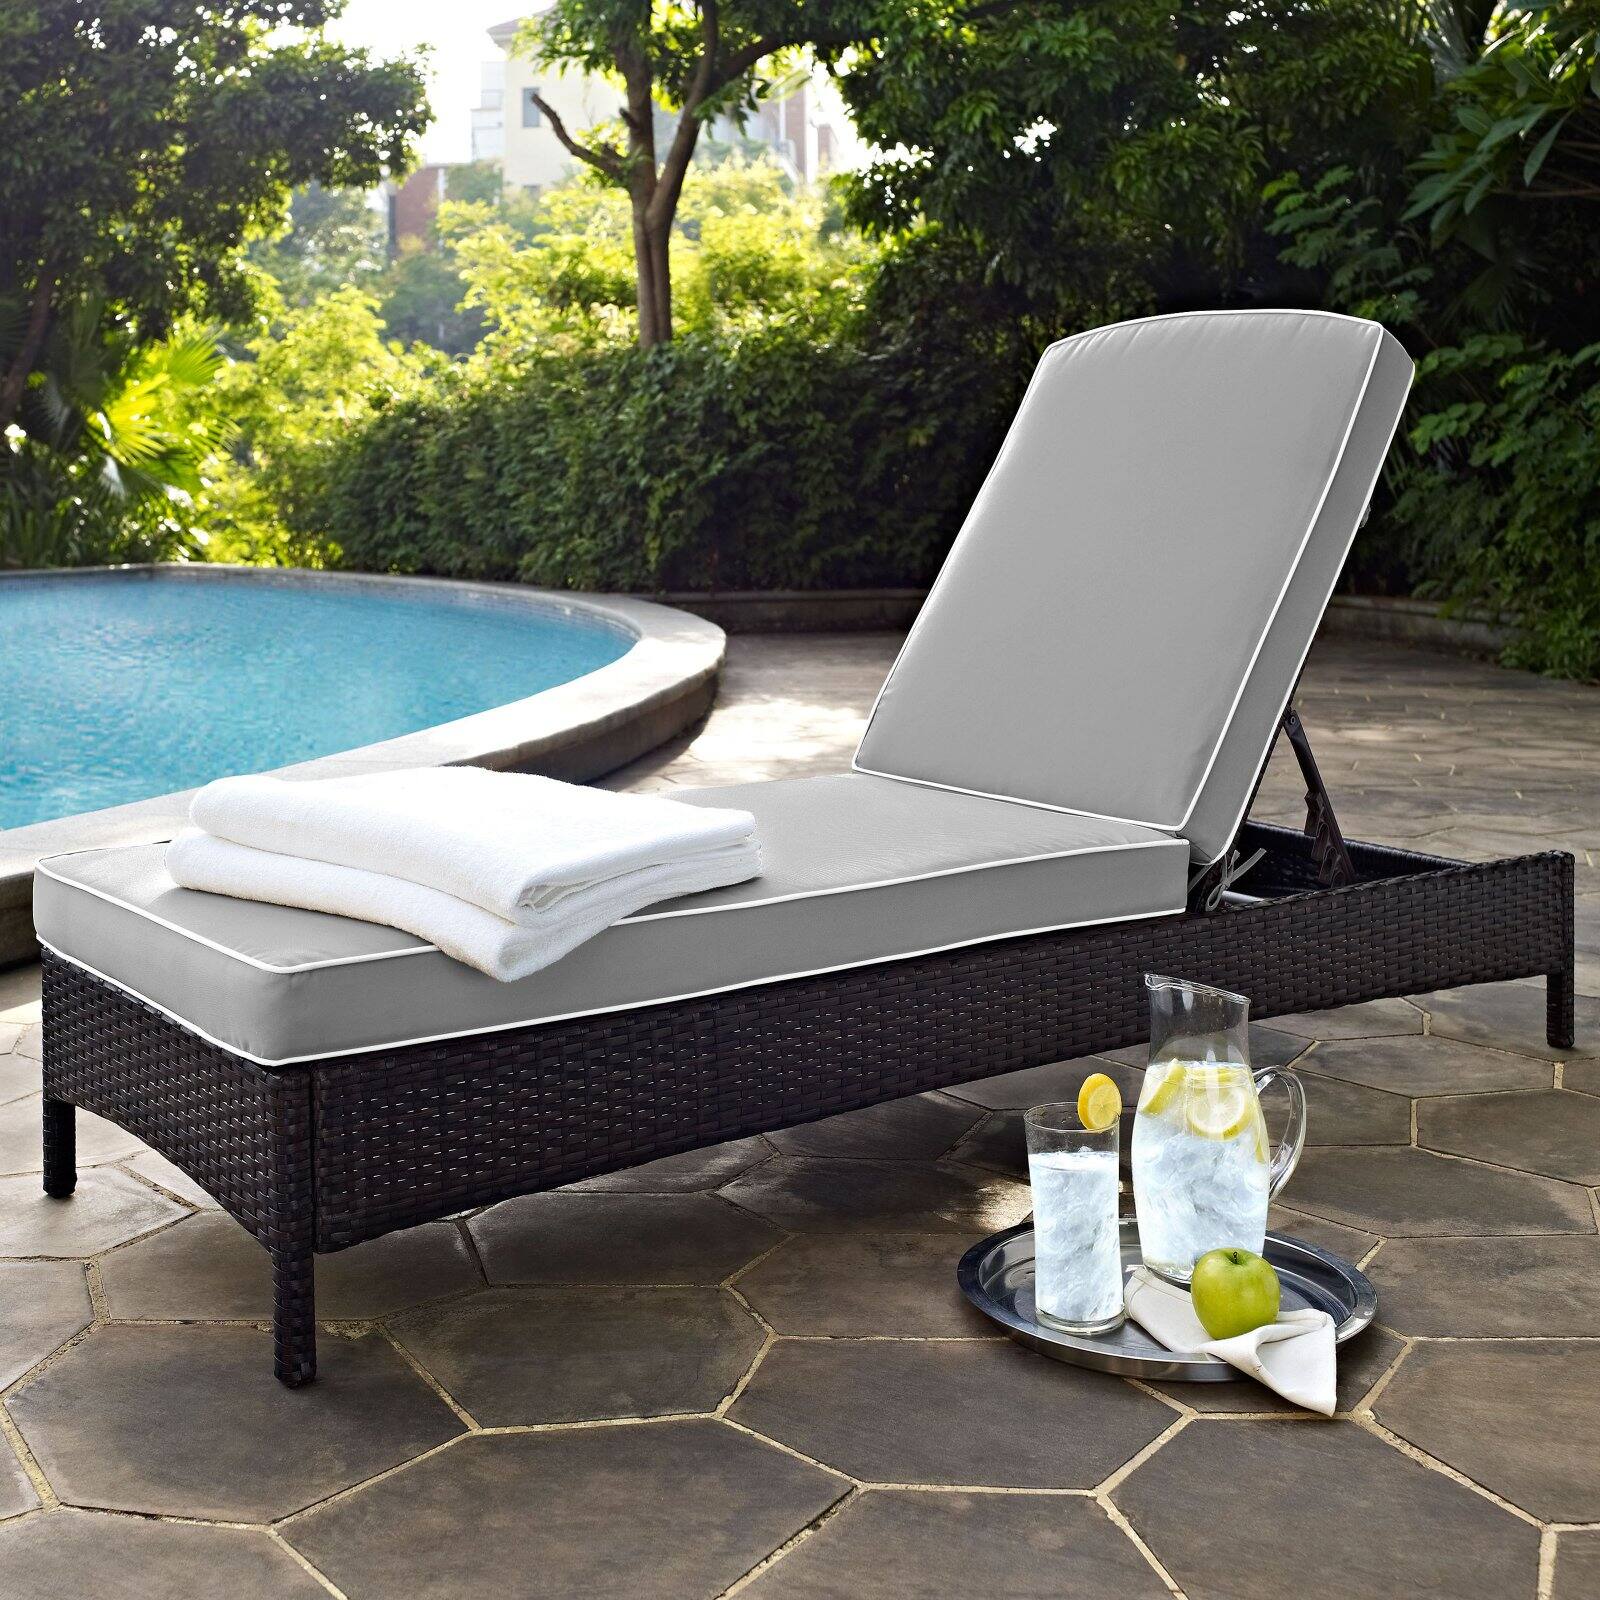 Crosley Palm Harbor Wicker Patio Chaise Lounge in Brown and Sand - image 2 of 9